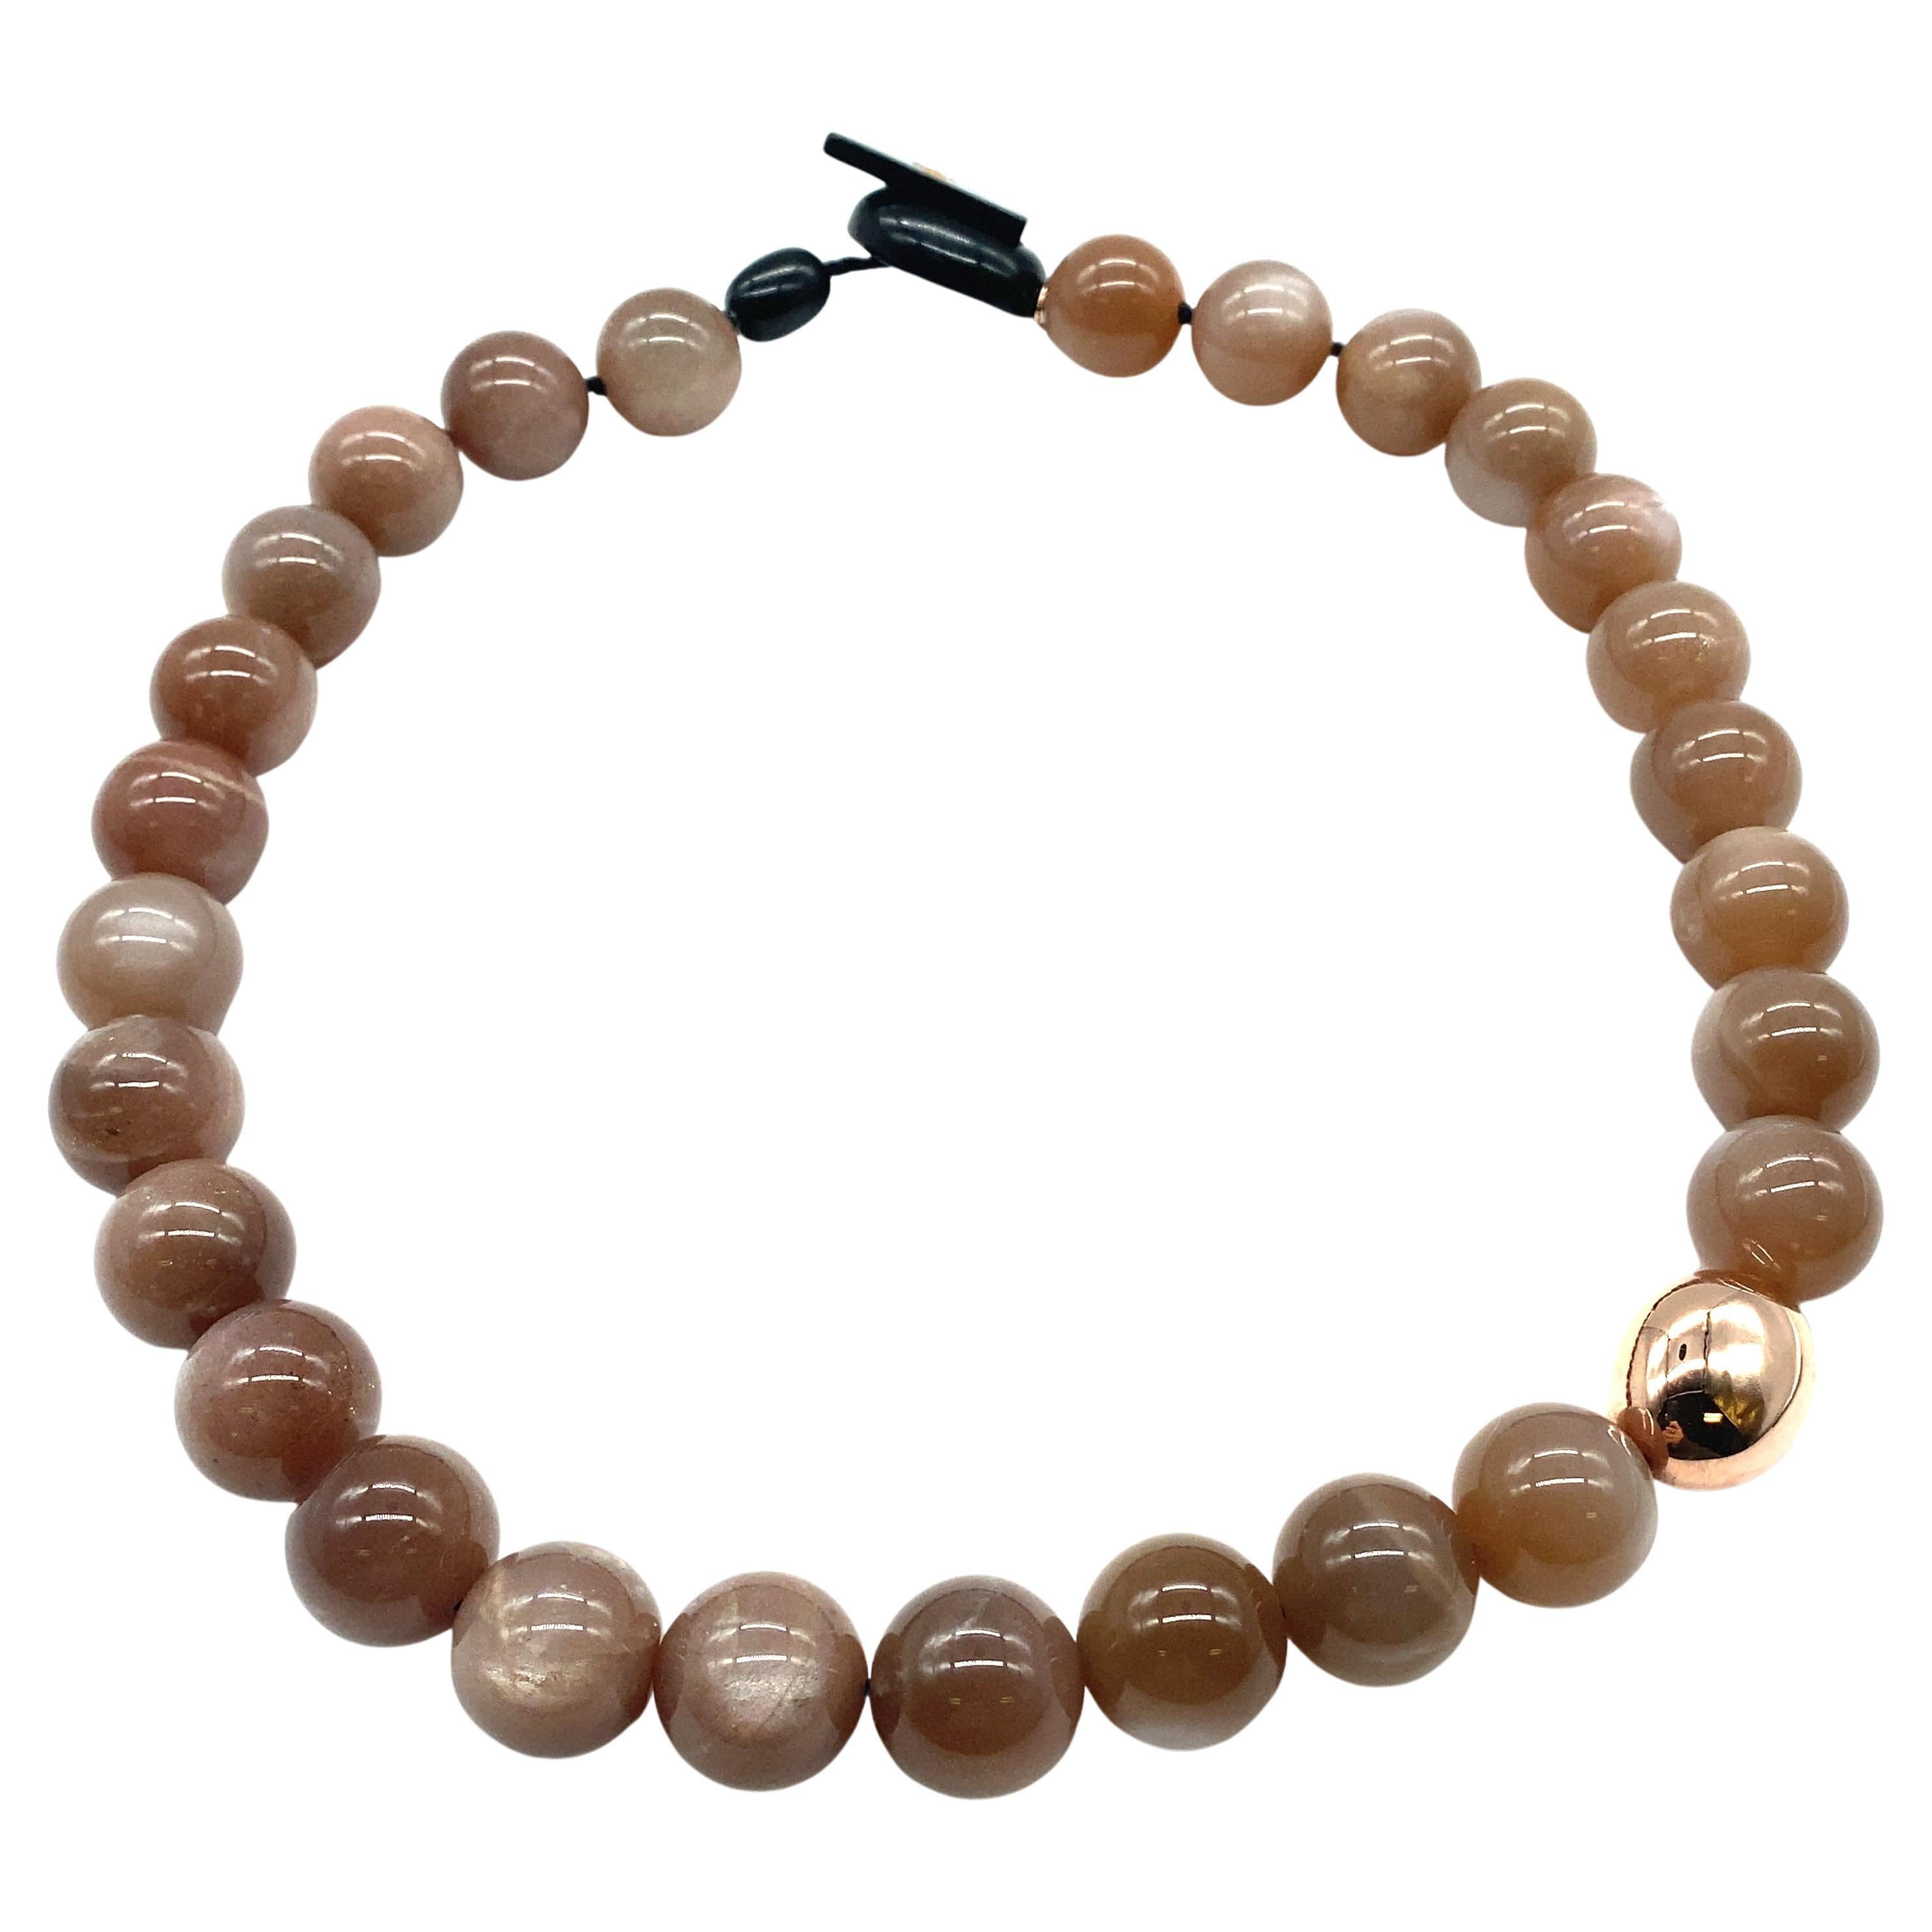 Discover our collection of moonstone, gold and bakelite pearl necklaces by Mesure et Art du Temps.

These French pearl necklaces come with a magnificent peach moonstone, measuring 1 cm in diameter. The necklace's easy-to-handle closure is made of